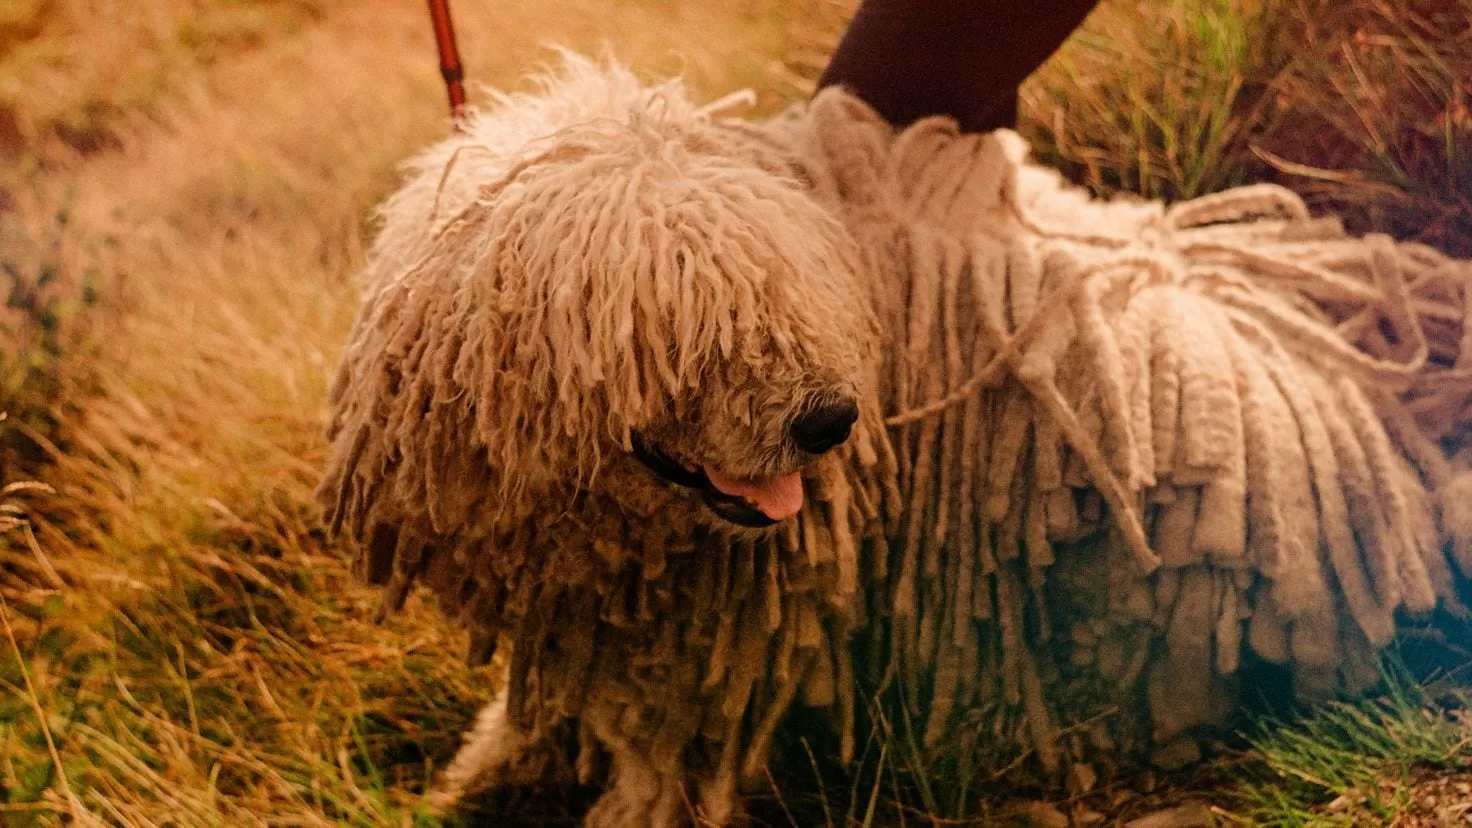 The story of Vazak, the dog that was on the list of nominees for the Oscars
